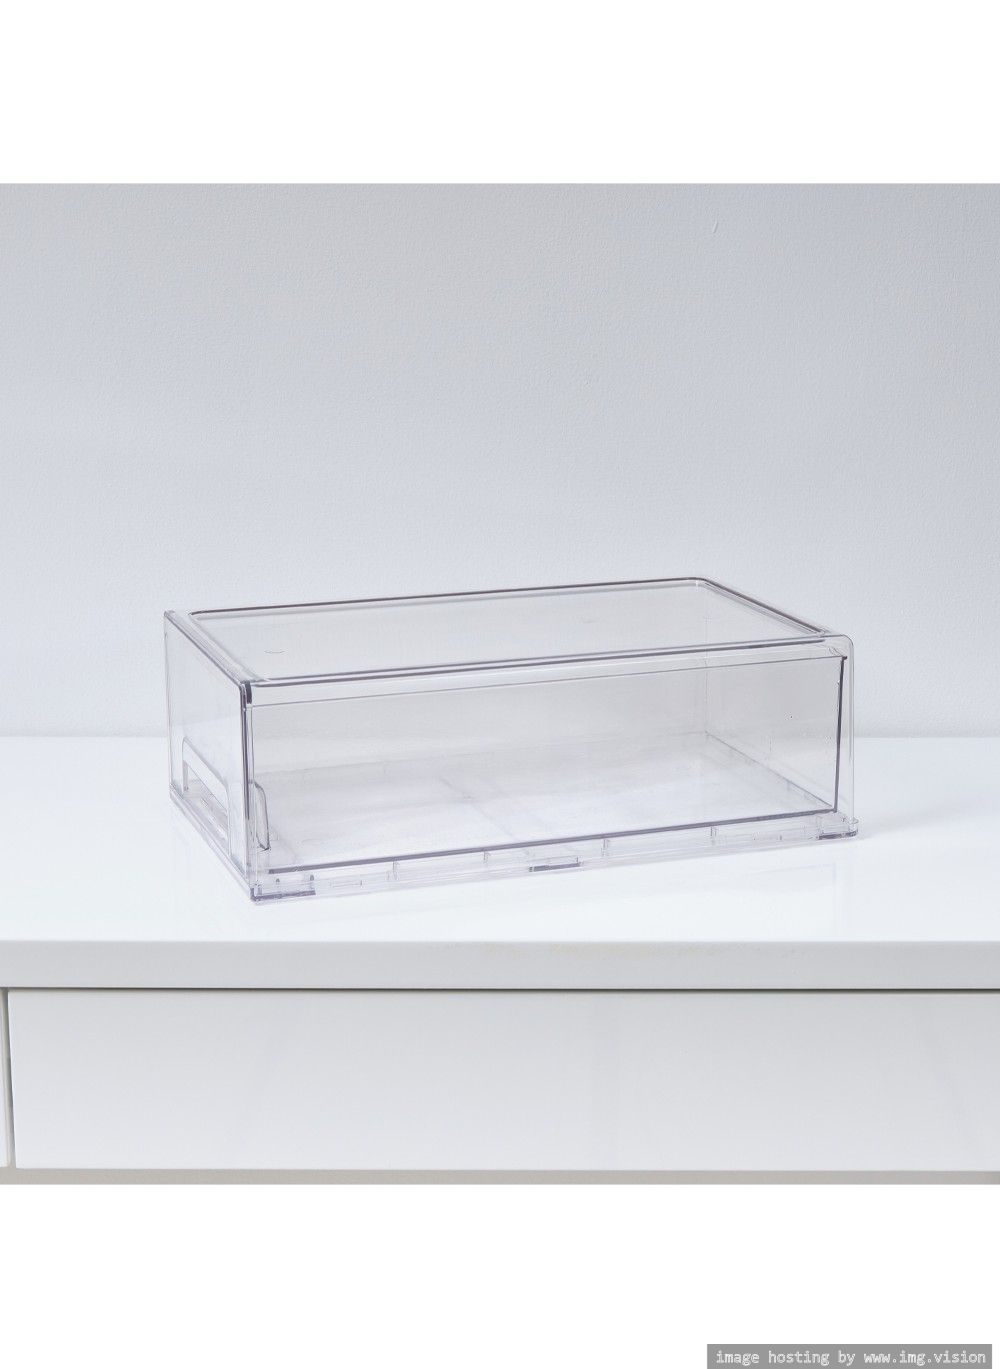 Homesmiths Stackable Storage Drawer Clear 33.7 x 21 x 11 cm